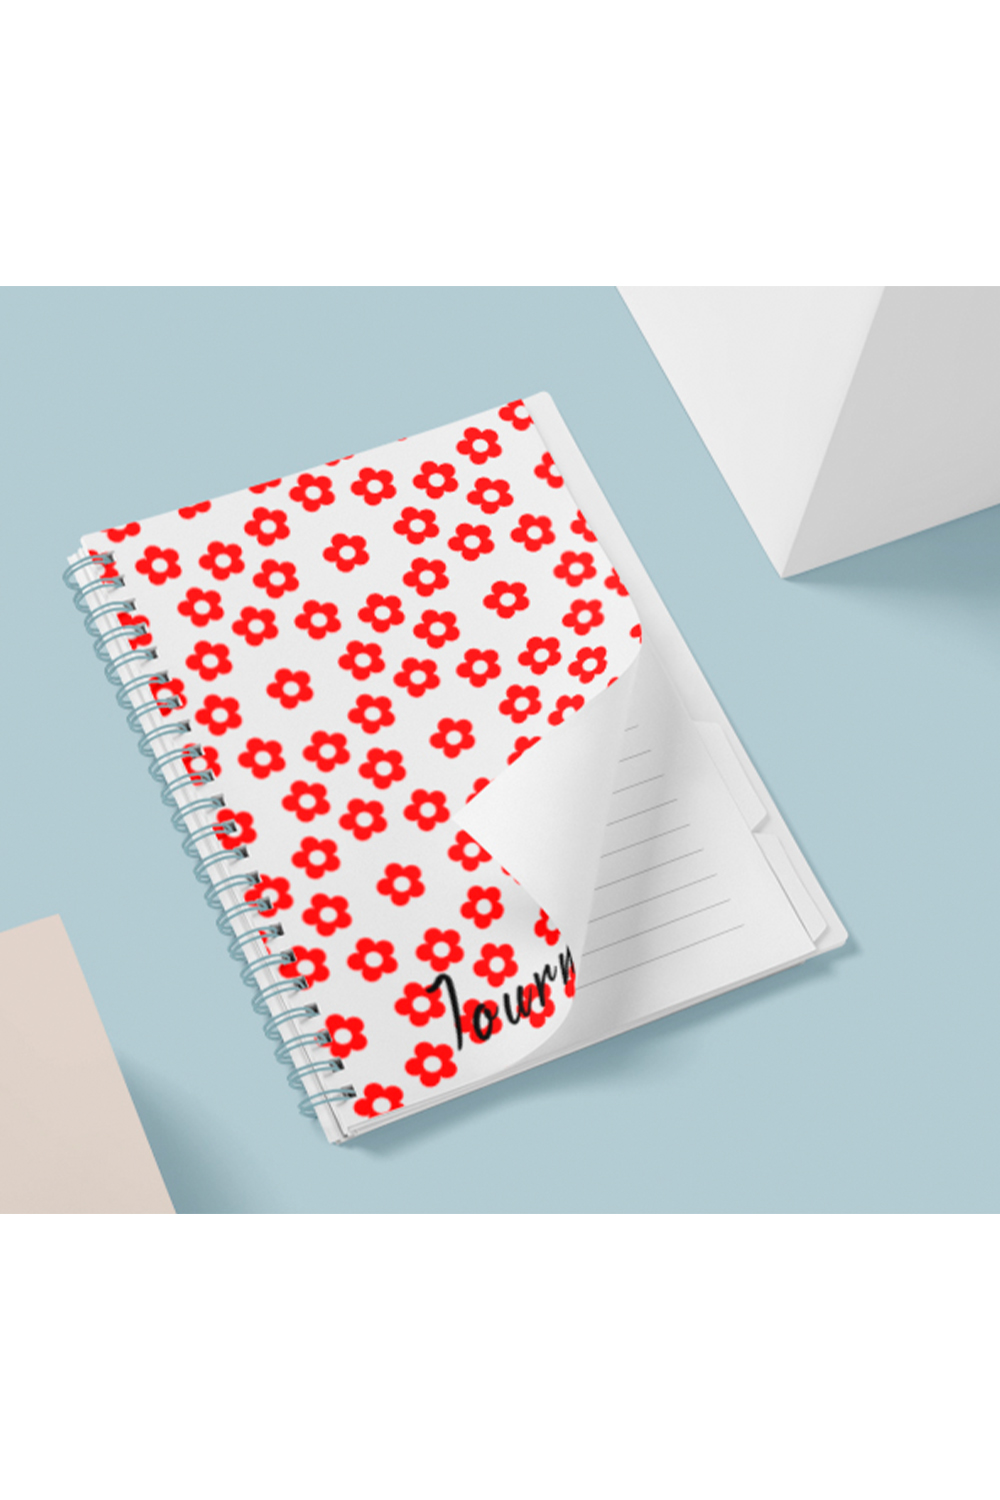 Image of a notebook with an irresistible floral cover design